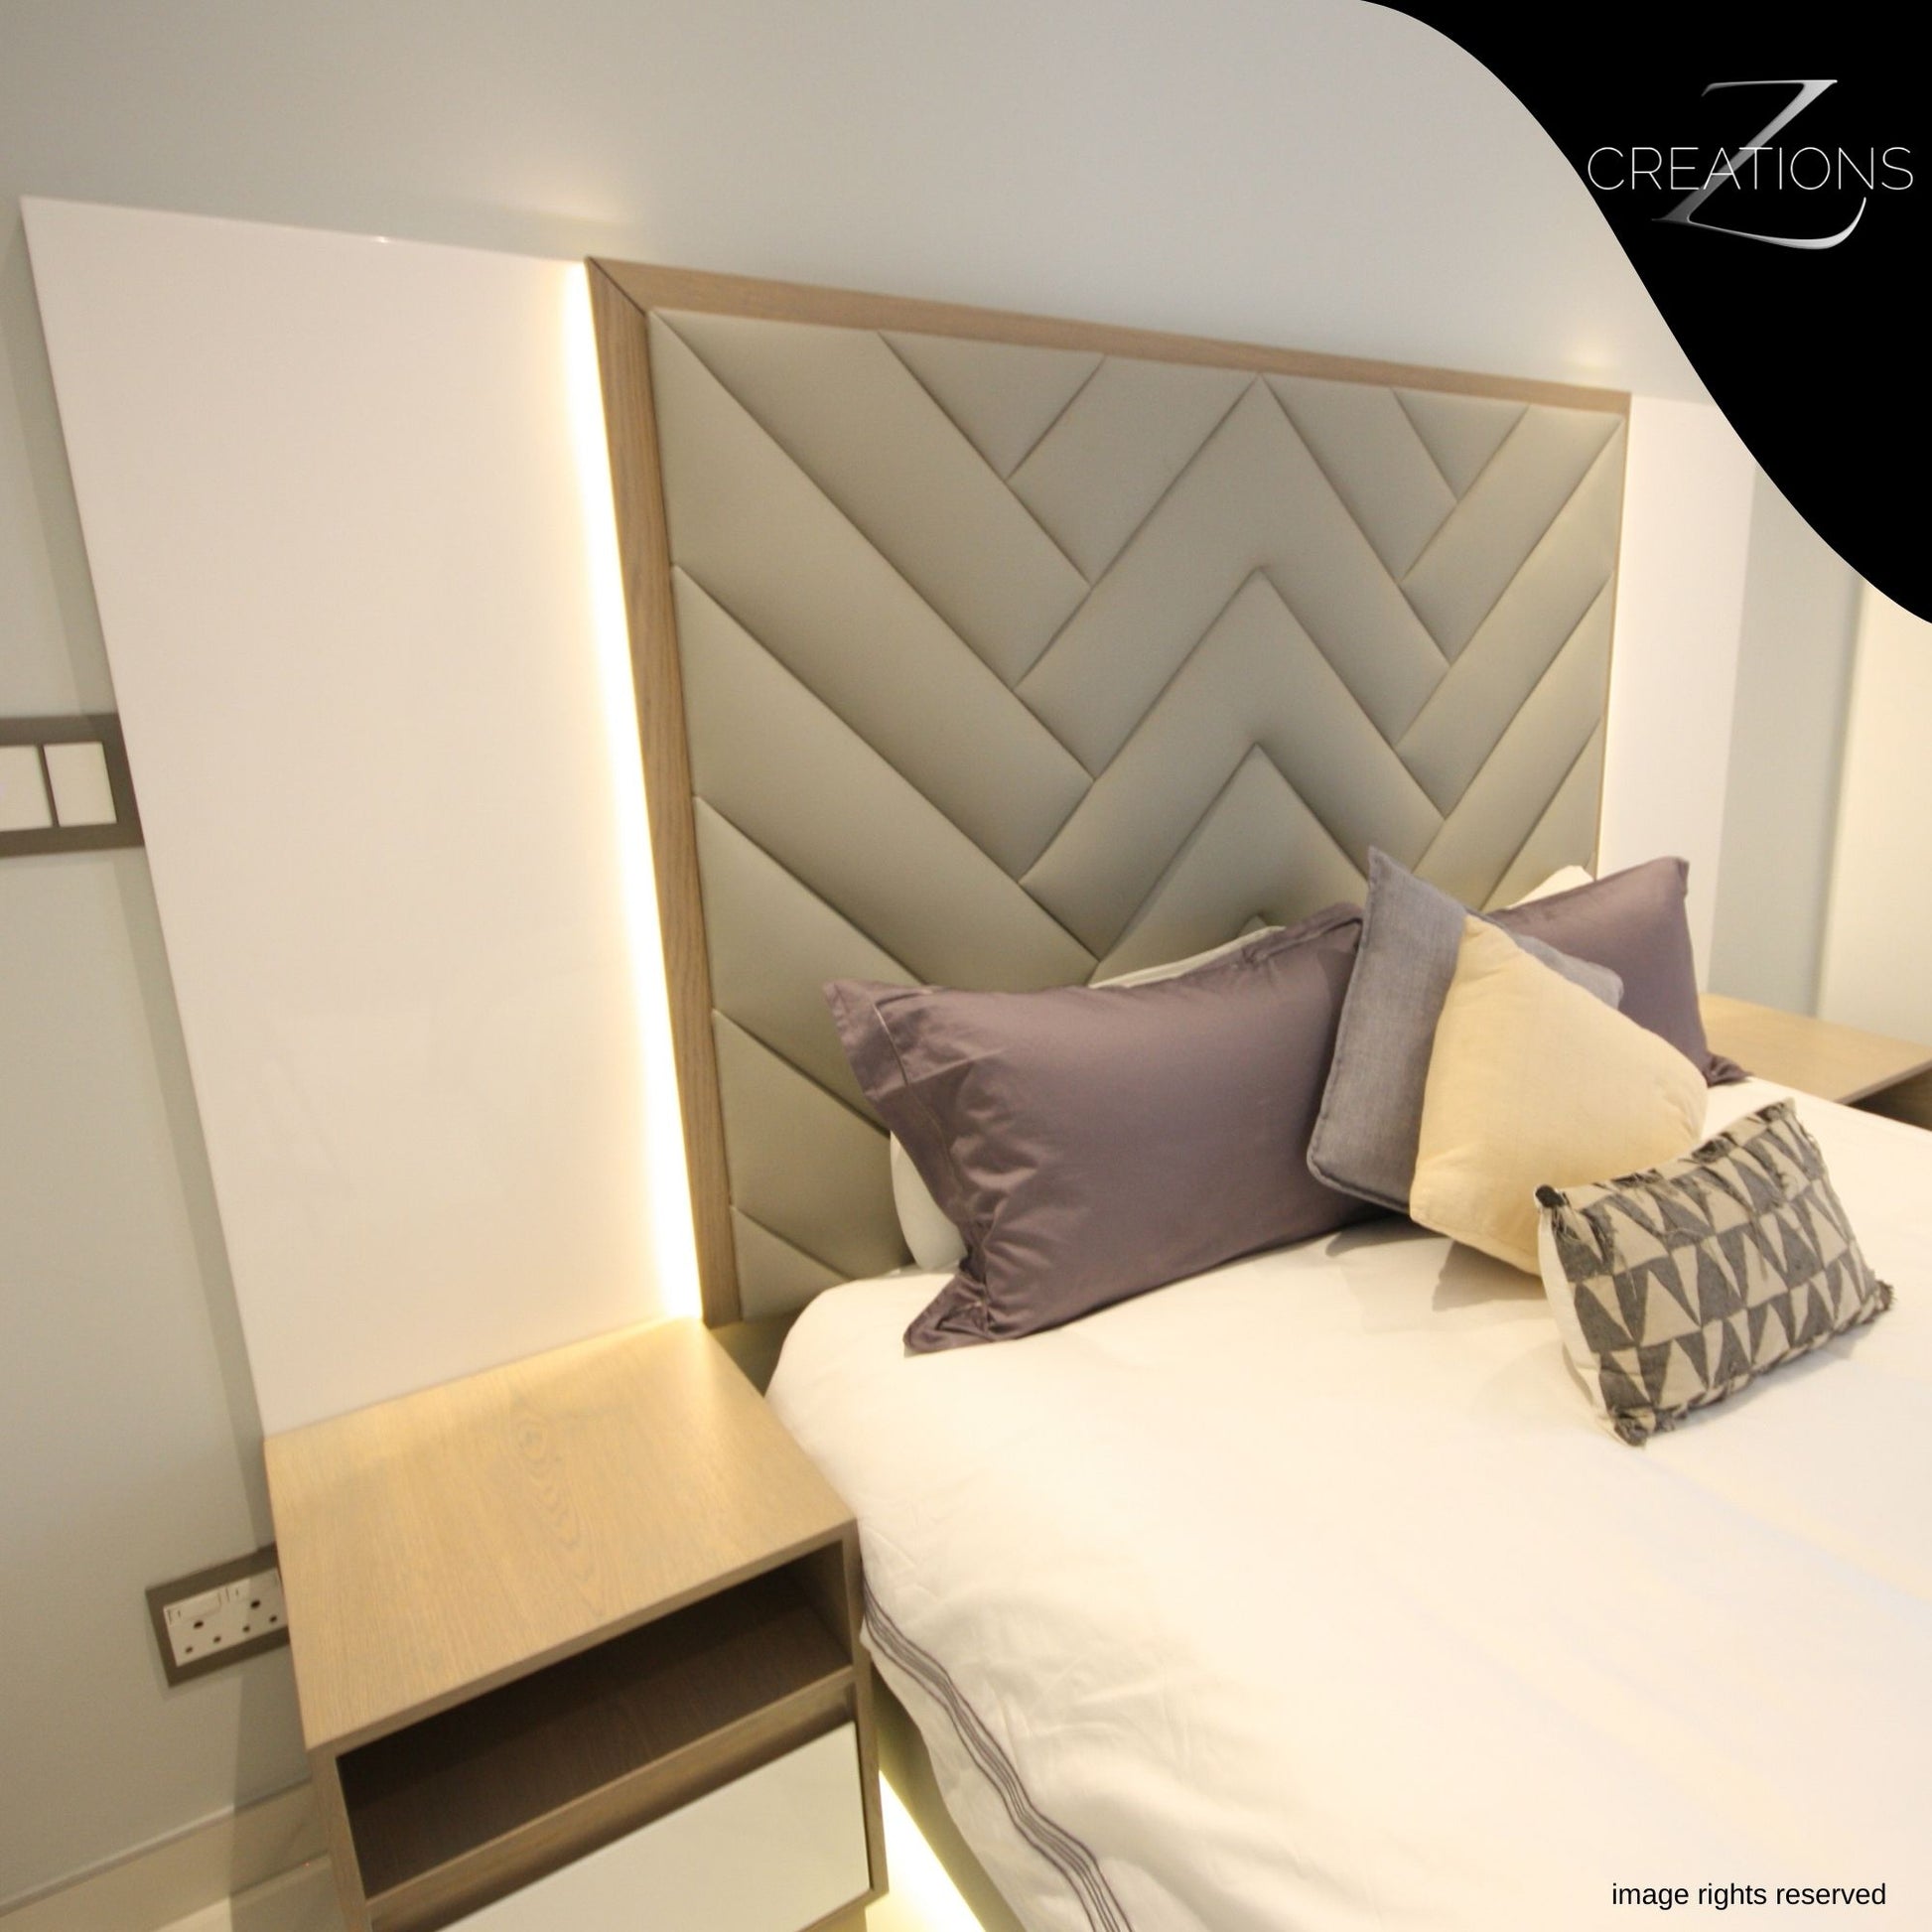 Zig-Zag Headboard with High-Quality Fabric, Gloss Finish, and LED Light - Crafted by ZCreations.co.za